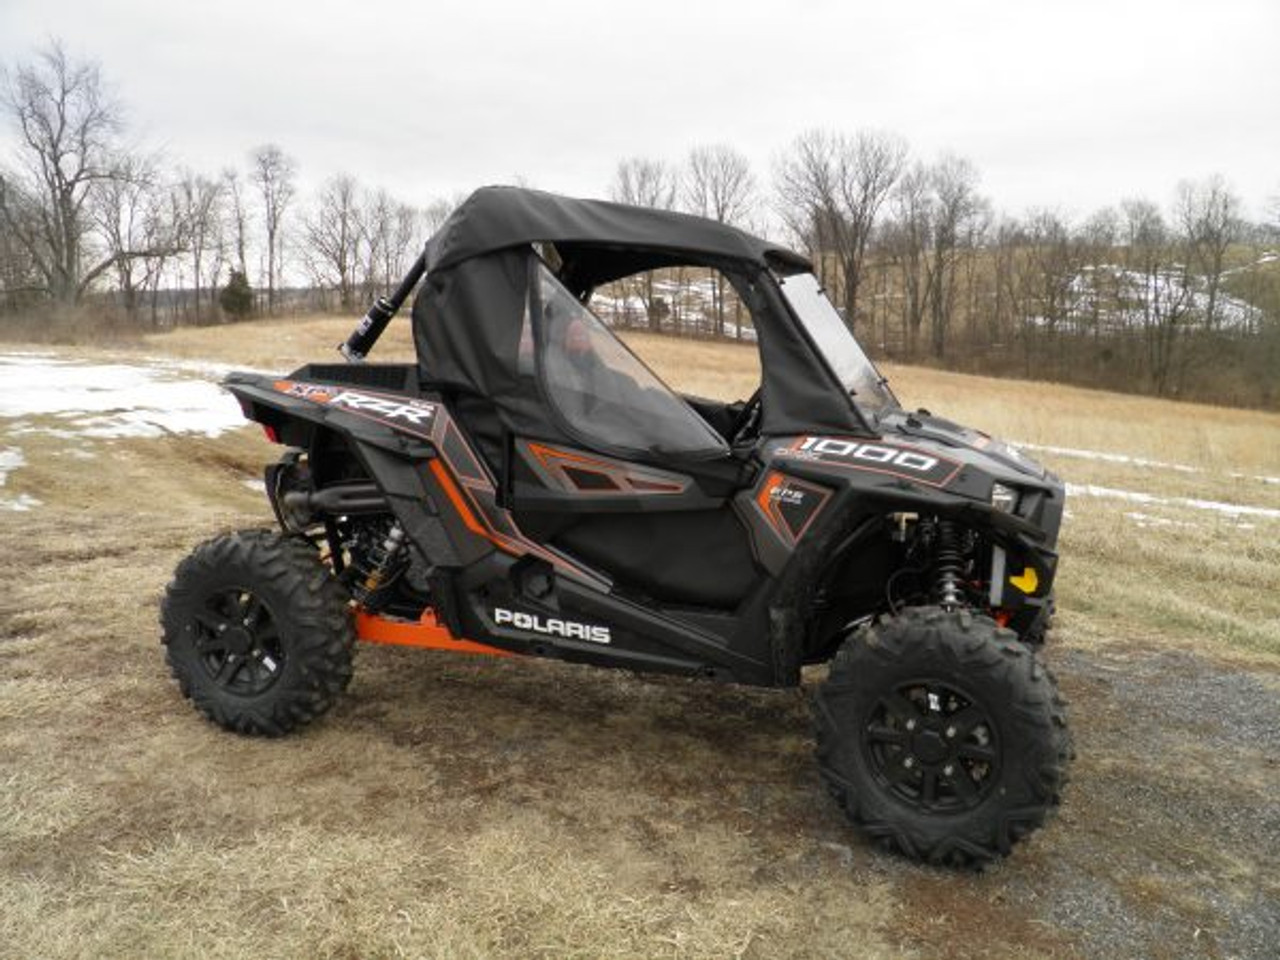 3 Star side x side Polaris RZR 900/1000 Full Cab Enclosure for Hard Windshield Side View